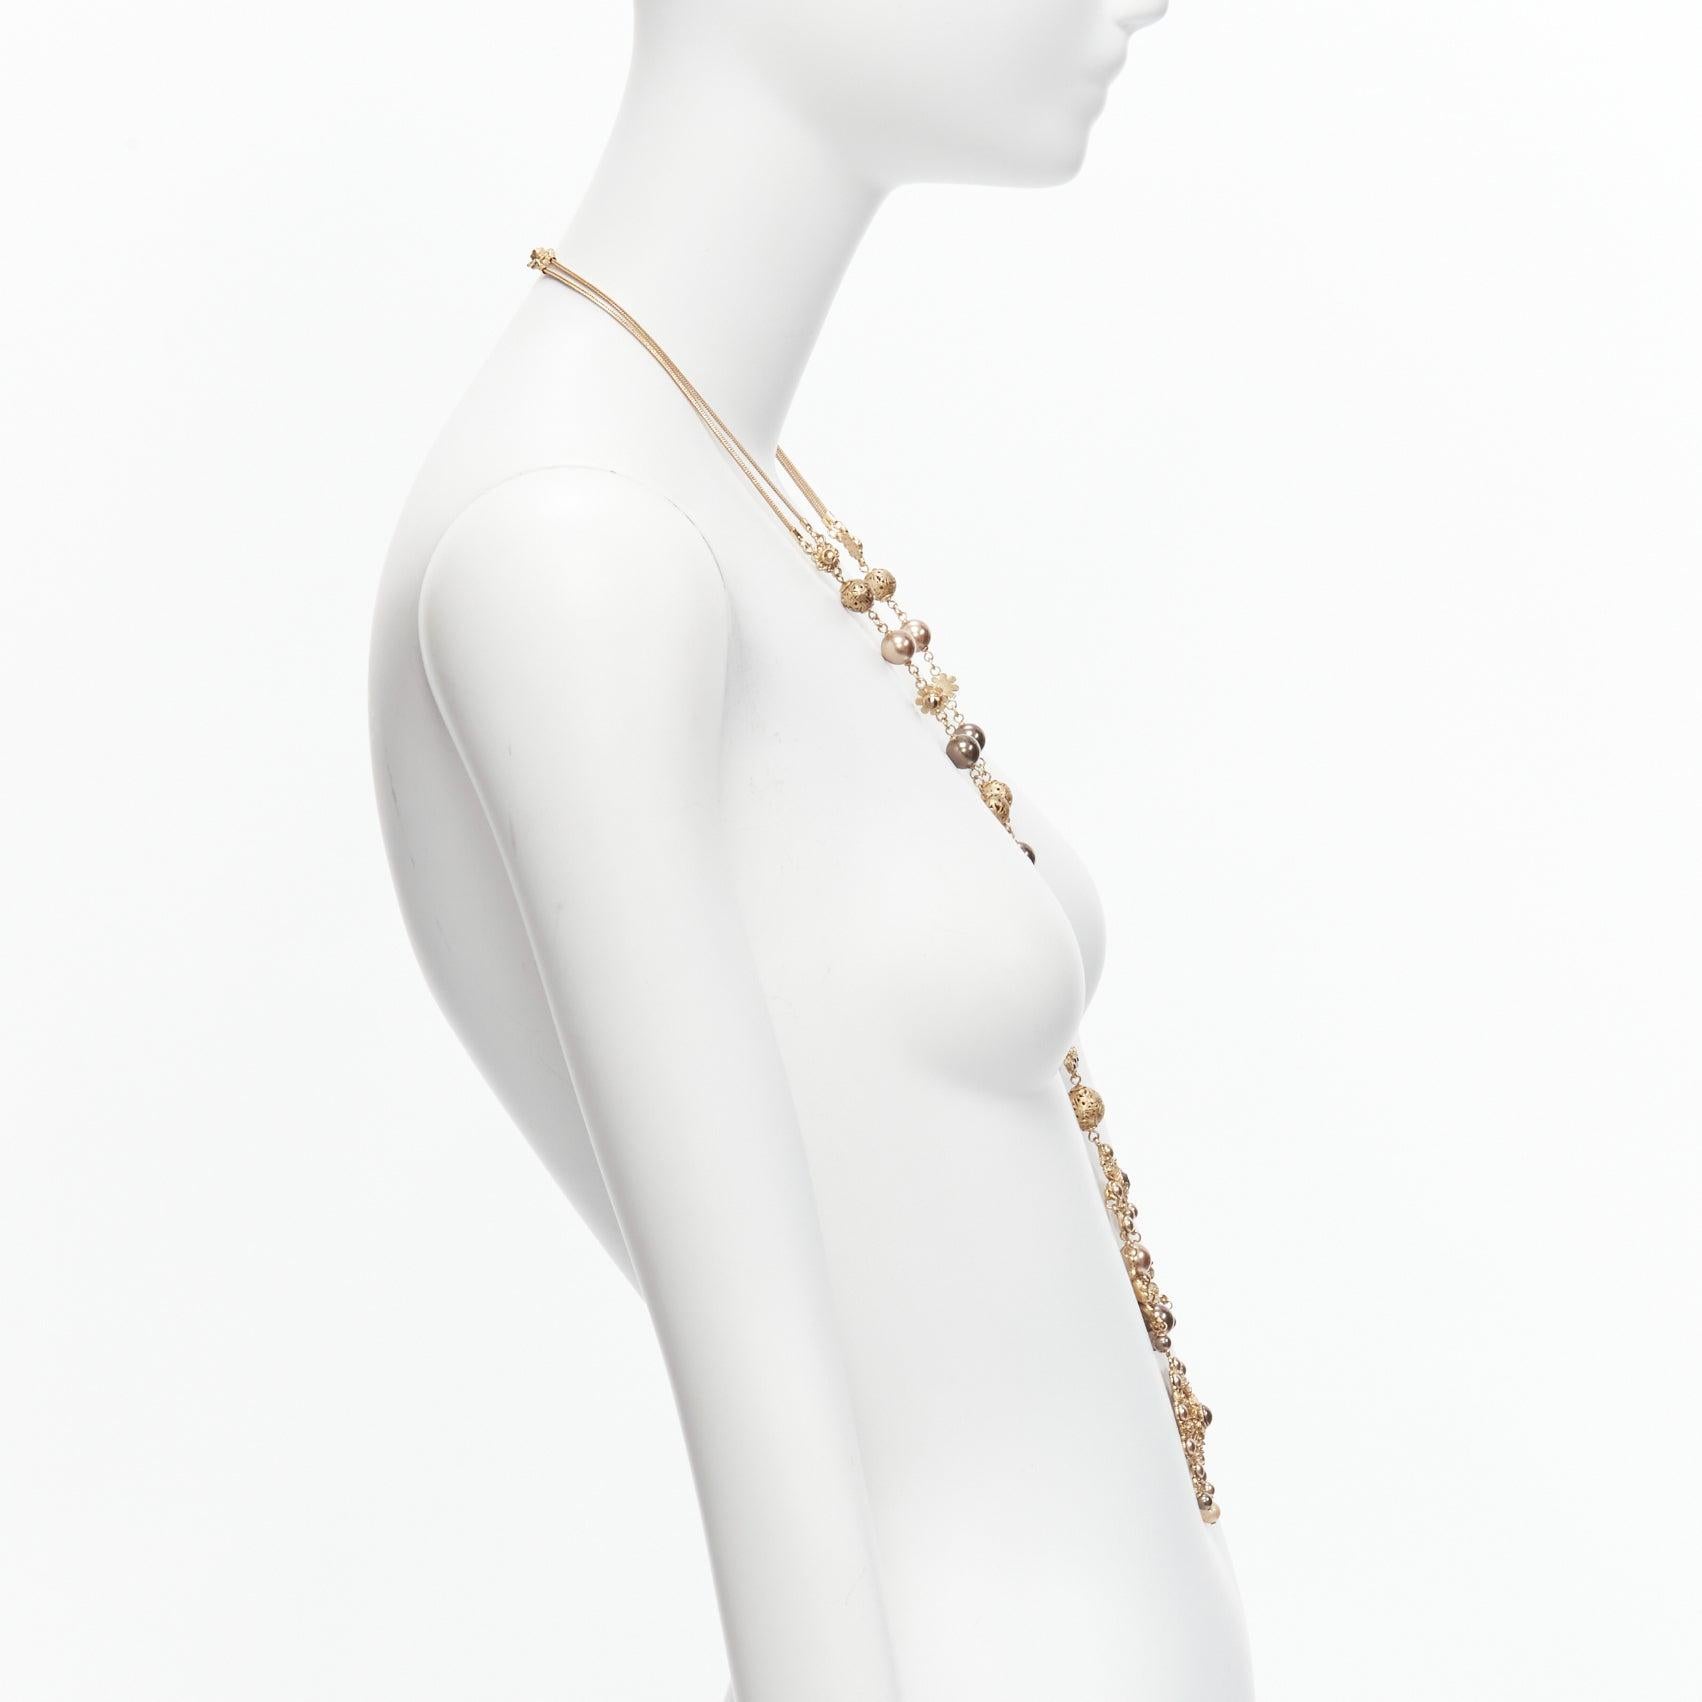 Women's CHANEL Karl Lagerfeld 06A gold CC pearl floral pendant long necklace